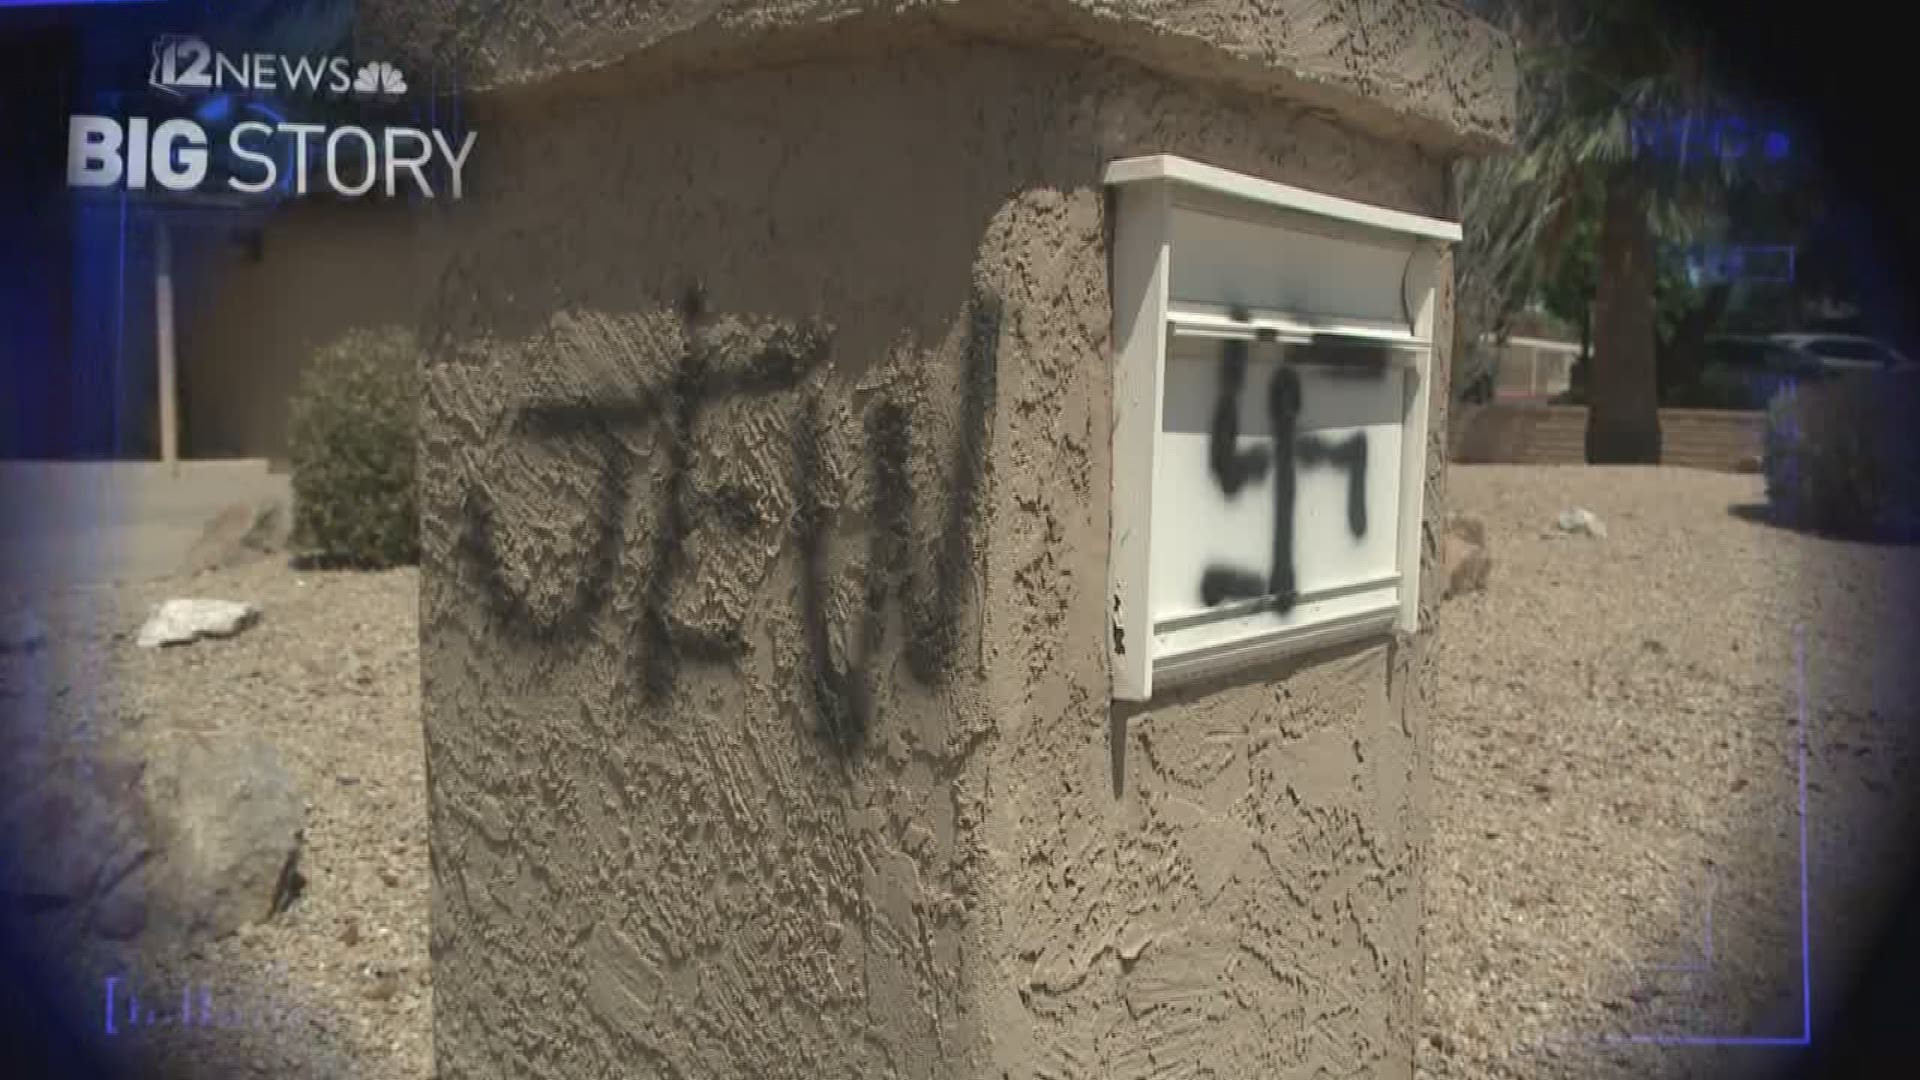 Phoenix couple speaks out after their home was vandalized with hateful graffiti.